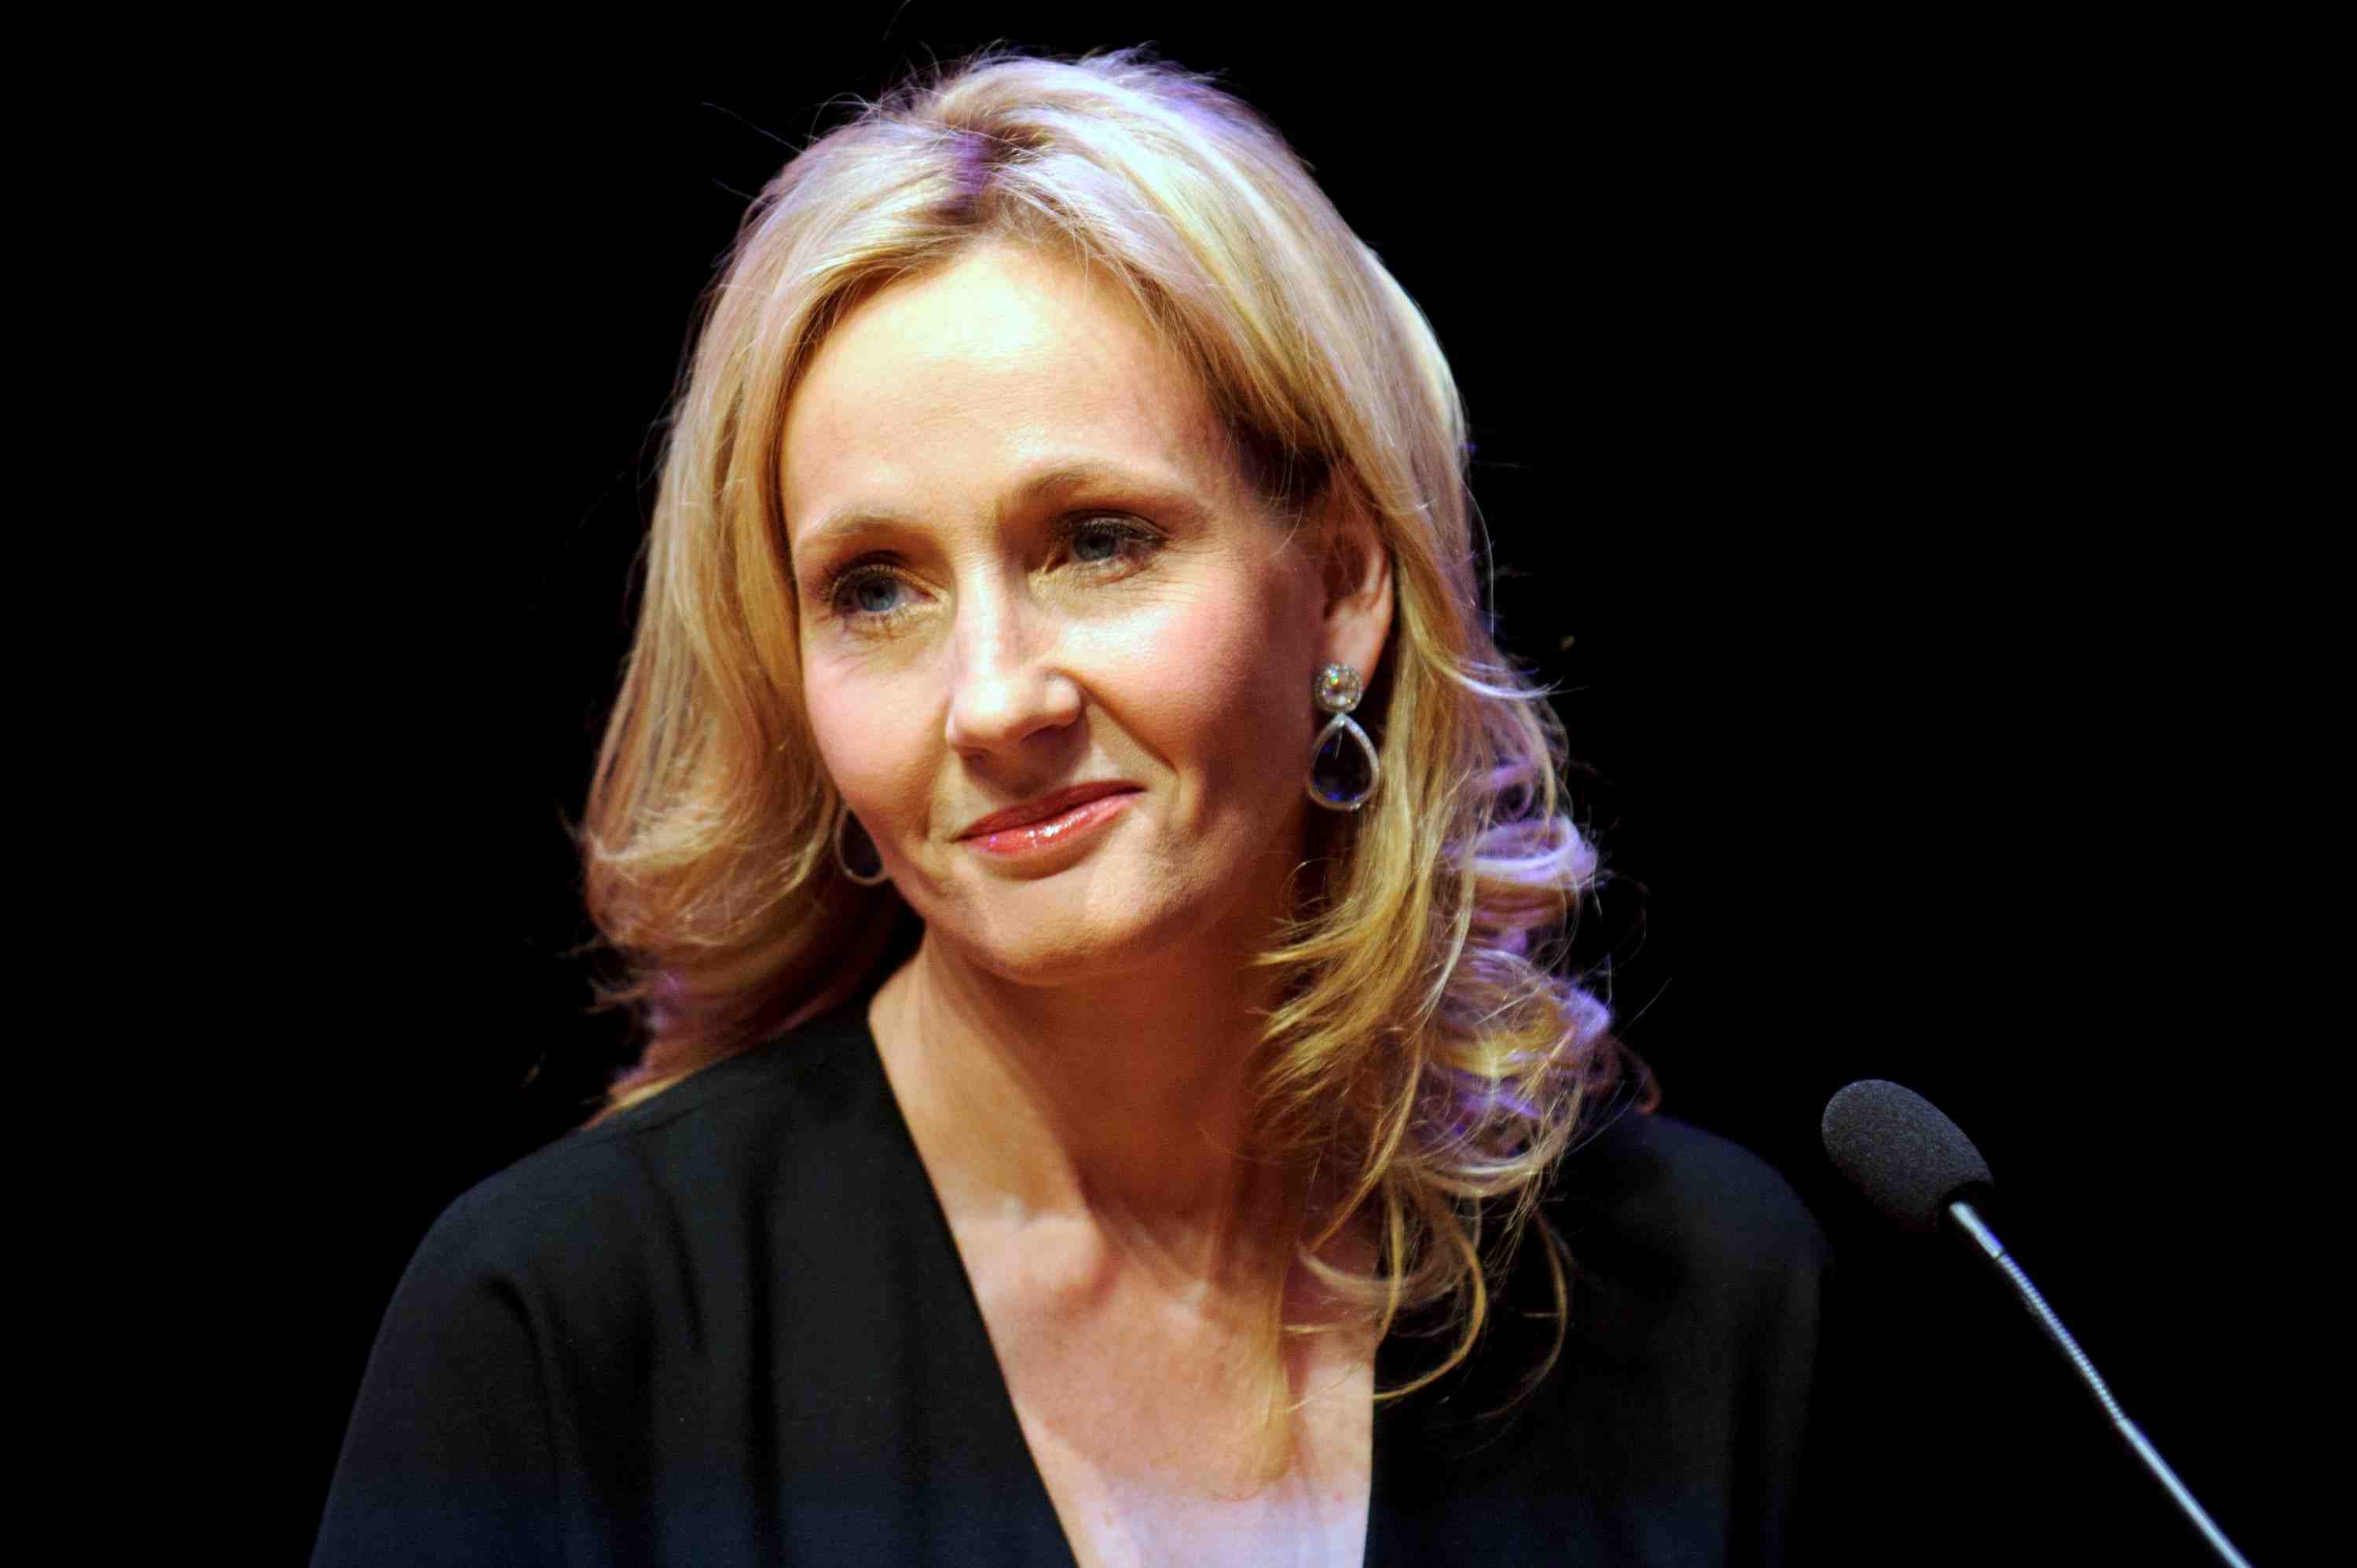 Steeped in a down-to-earth controversy, could JK Rowling's Twitter drama land her behind bars? Discover the legal twist in the misgendering allegations tale only the creator of Hogwarts could weave.